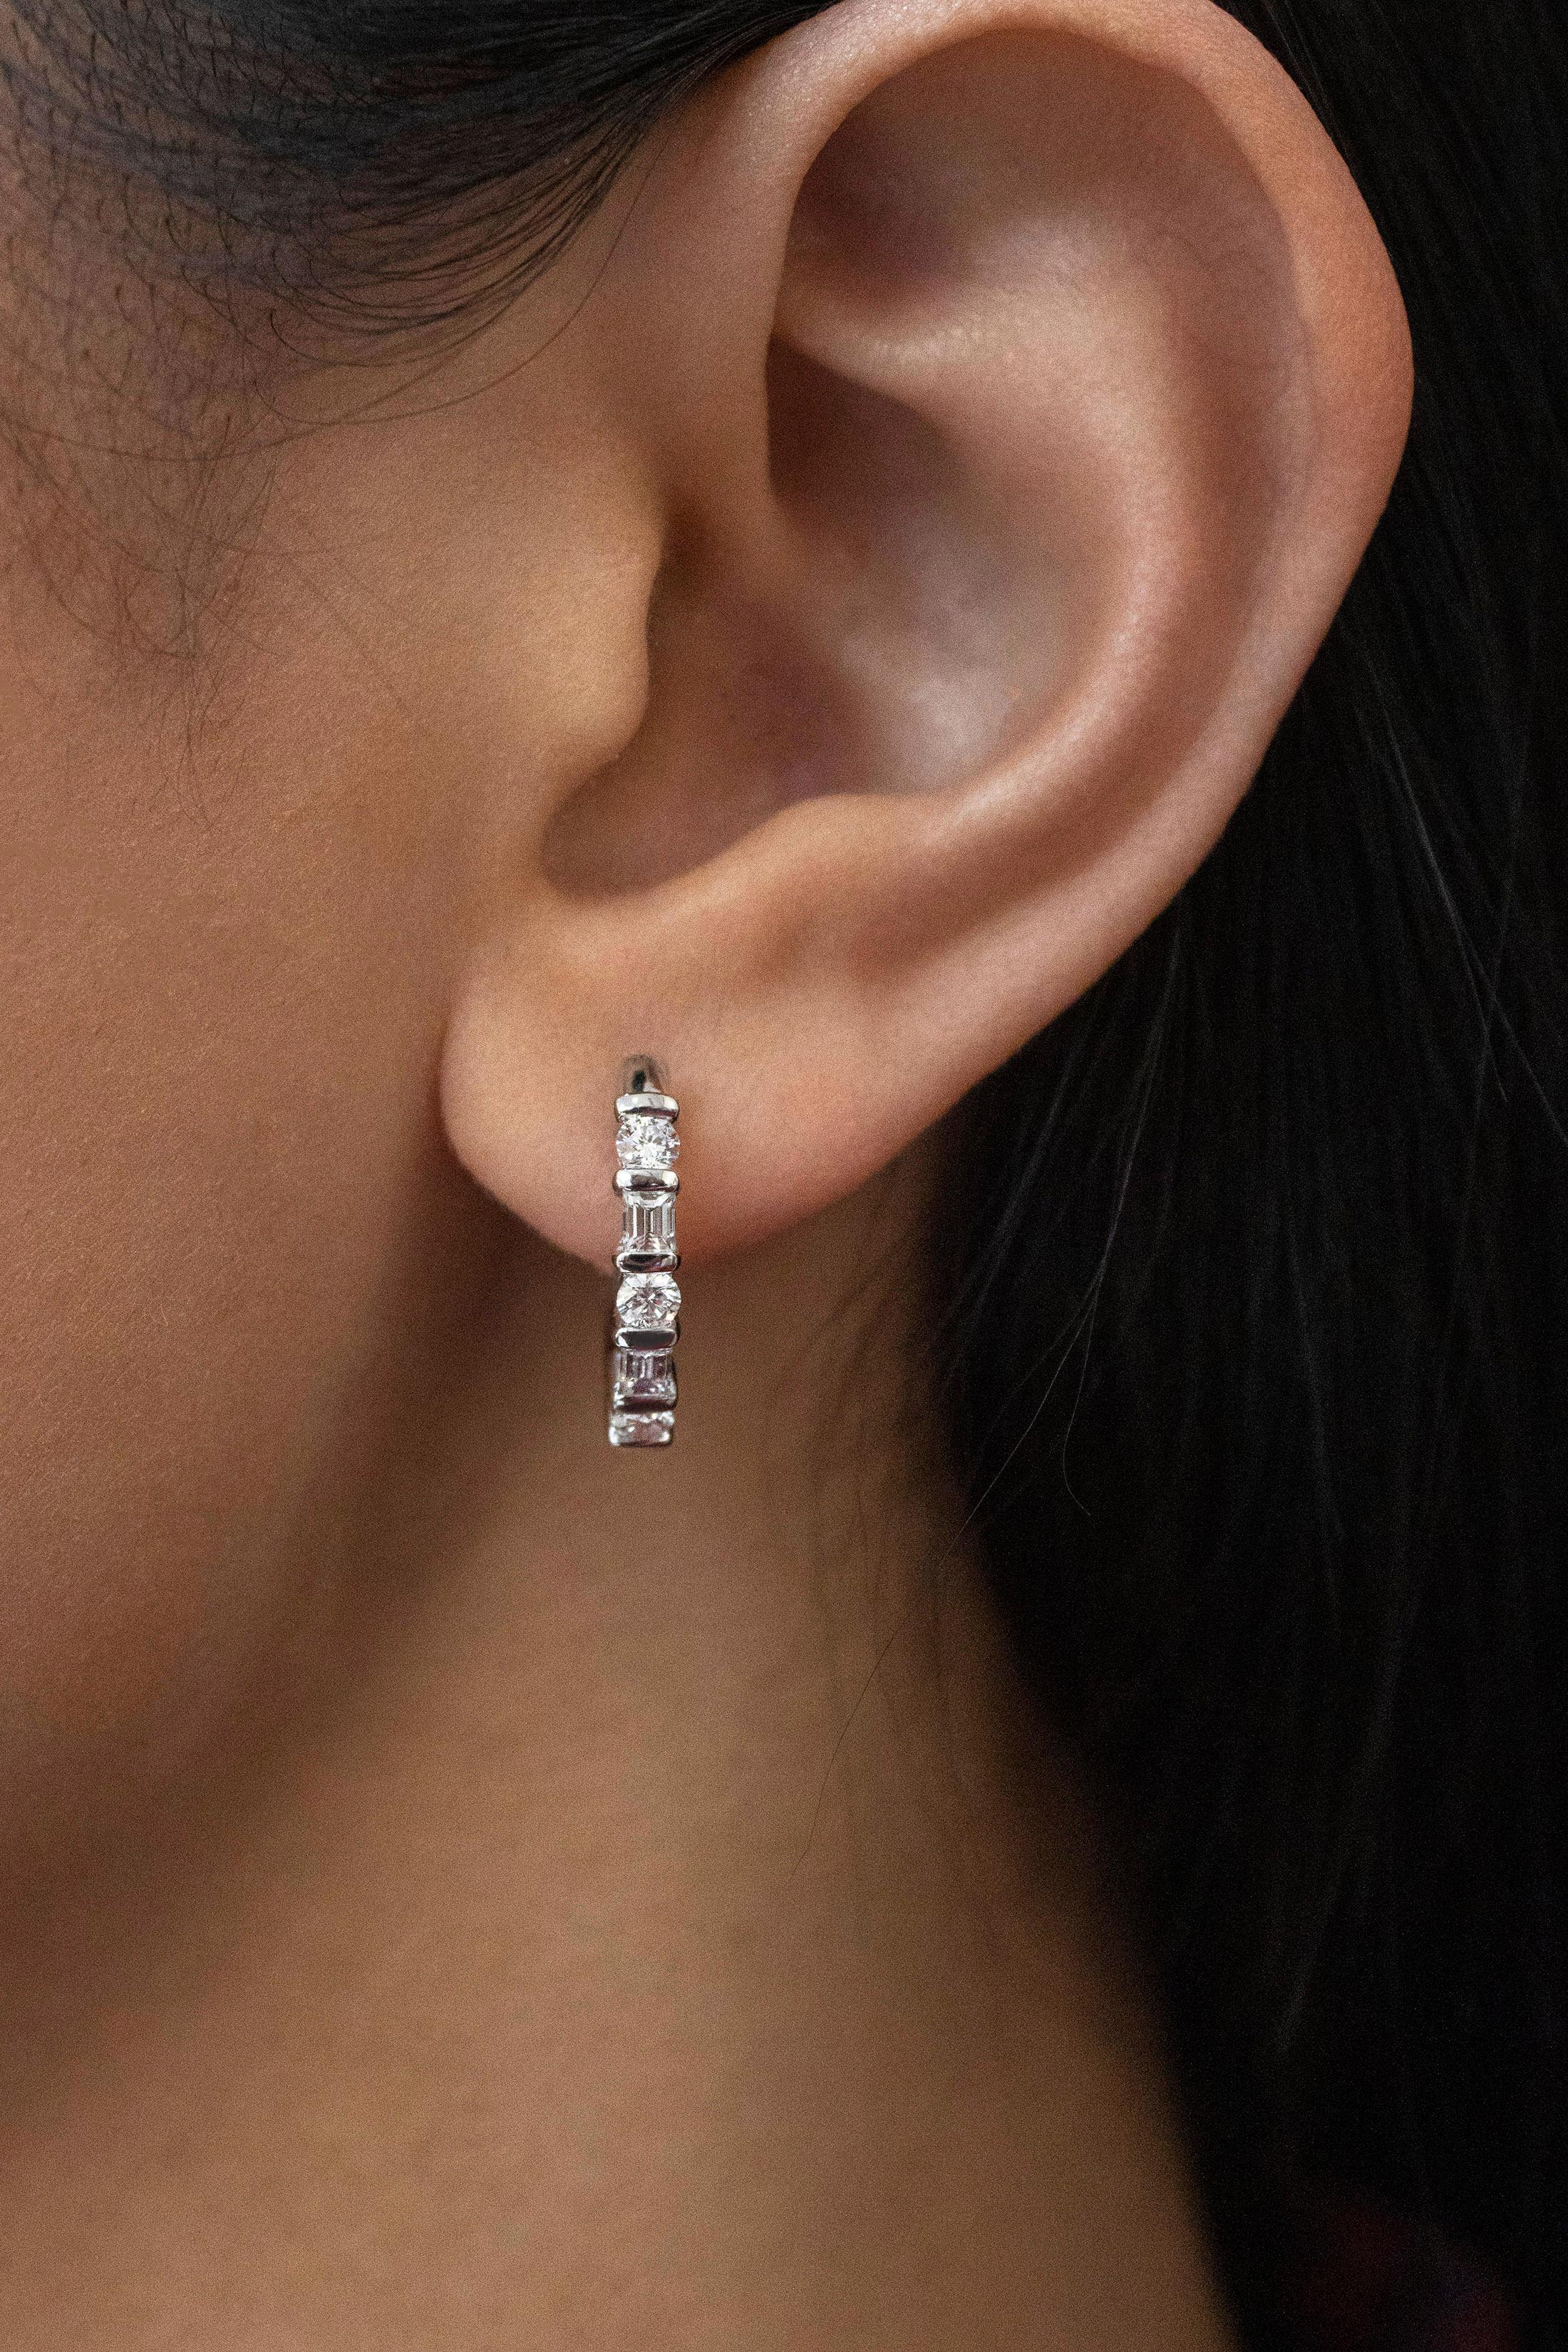 A simple pair of huggie hoop earrings showcasing alternating round and baguette cut diamonds. Set in a shared bar setting made in 18 karat white gold. Diamonds weigh 0.85 carats total. 

Style available in different price ranges. Prices are based on